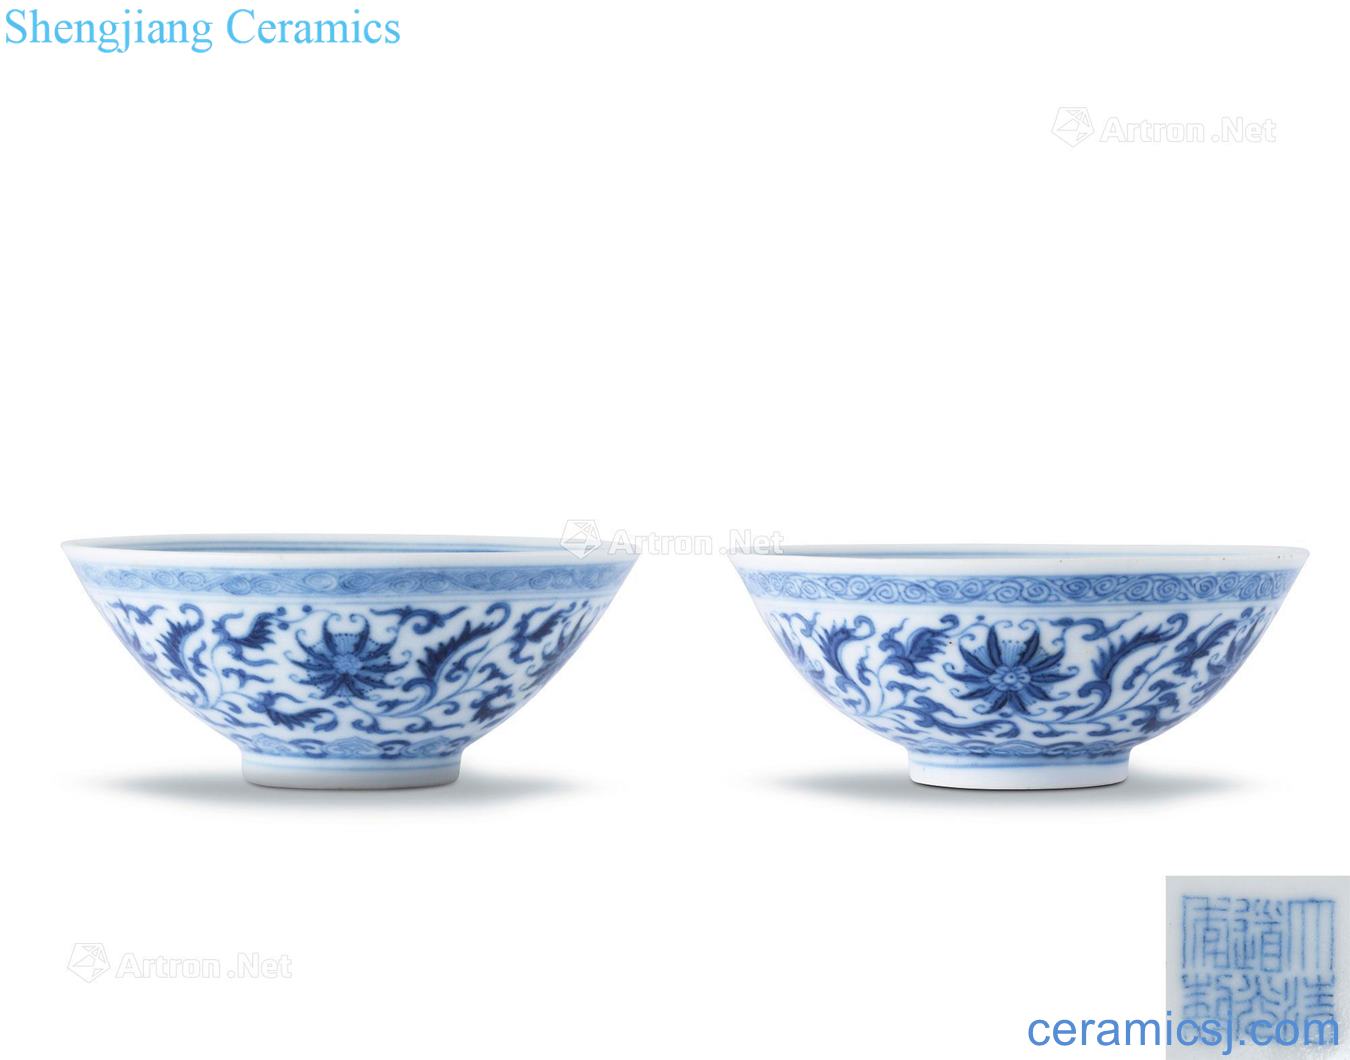 Qing daoguang Blue and white's lotus grain 盌 (a)